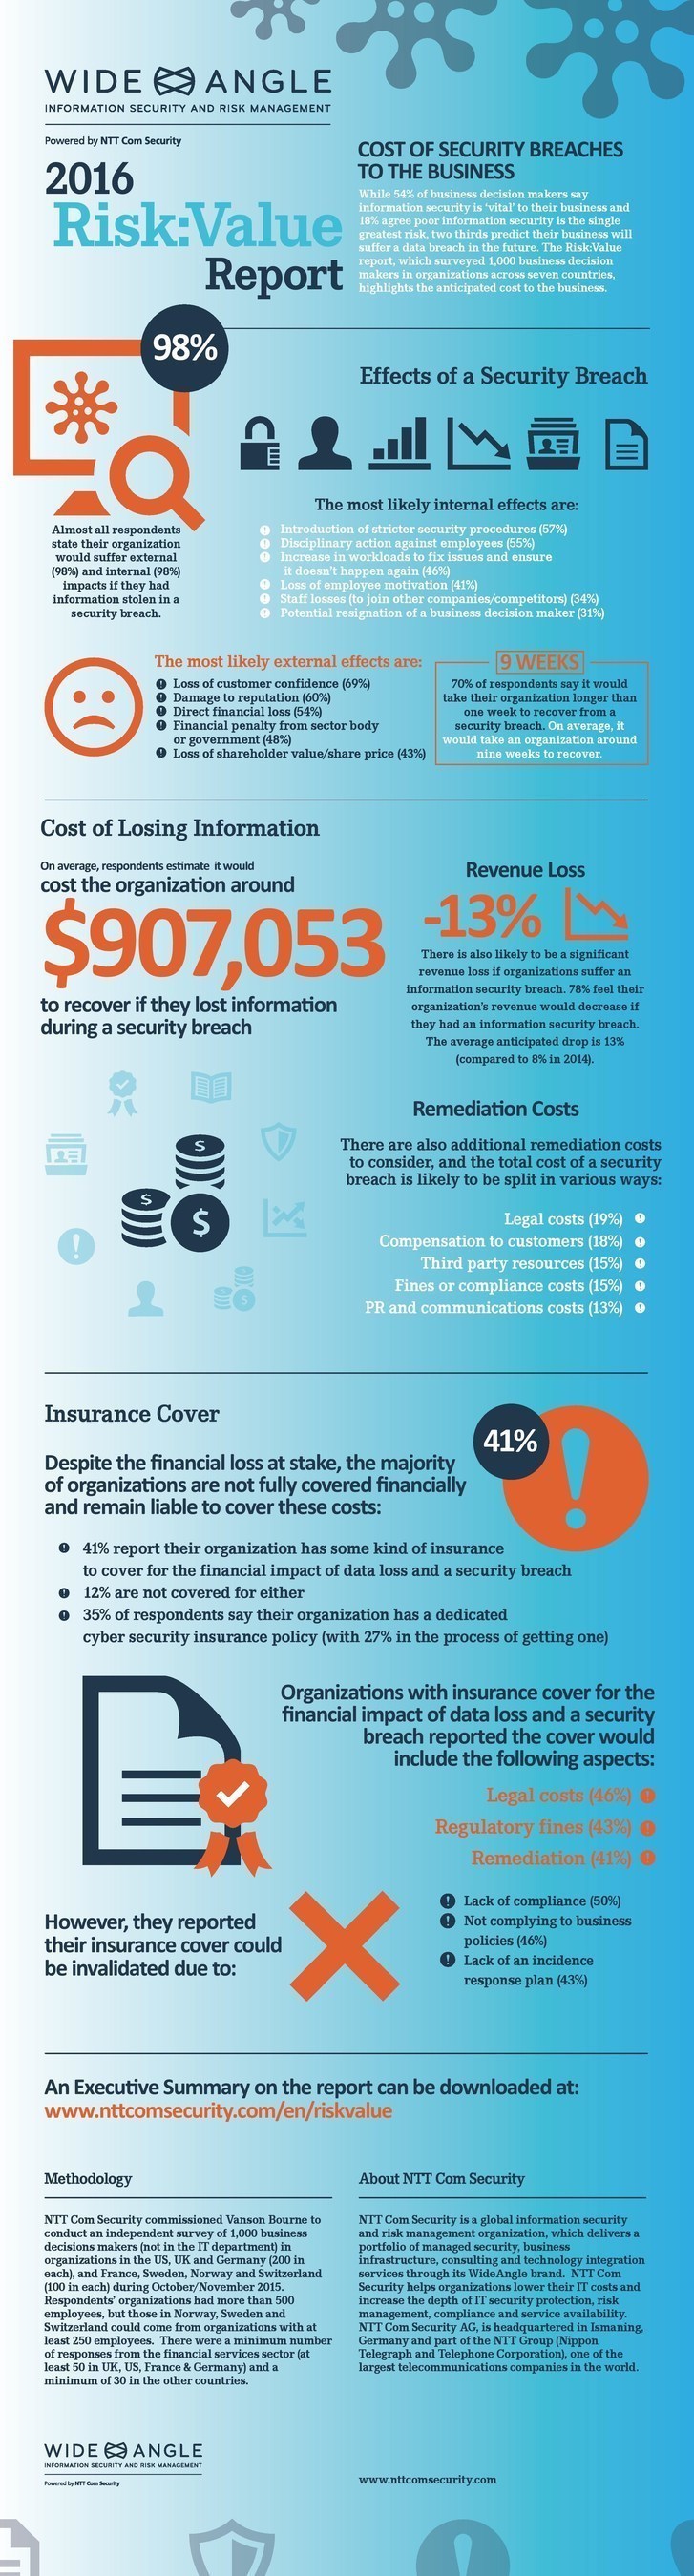 Two thirds of global businesses predict they will suffer a security breach.Ã‚Â The cost of such a breach to each organization will be nearly $1m and take two months, on average, to recover from, according to the newÃ‚Â Risk:Value 2016Ã‚Â 'Security breaches - what's the real cost to your business?' report from information security and risk management company, NTT Com Security, launched today. (PRNewsFoto/NTT Com Security) (PRNewsFoto/NTT Com Security)